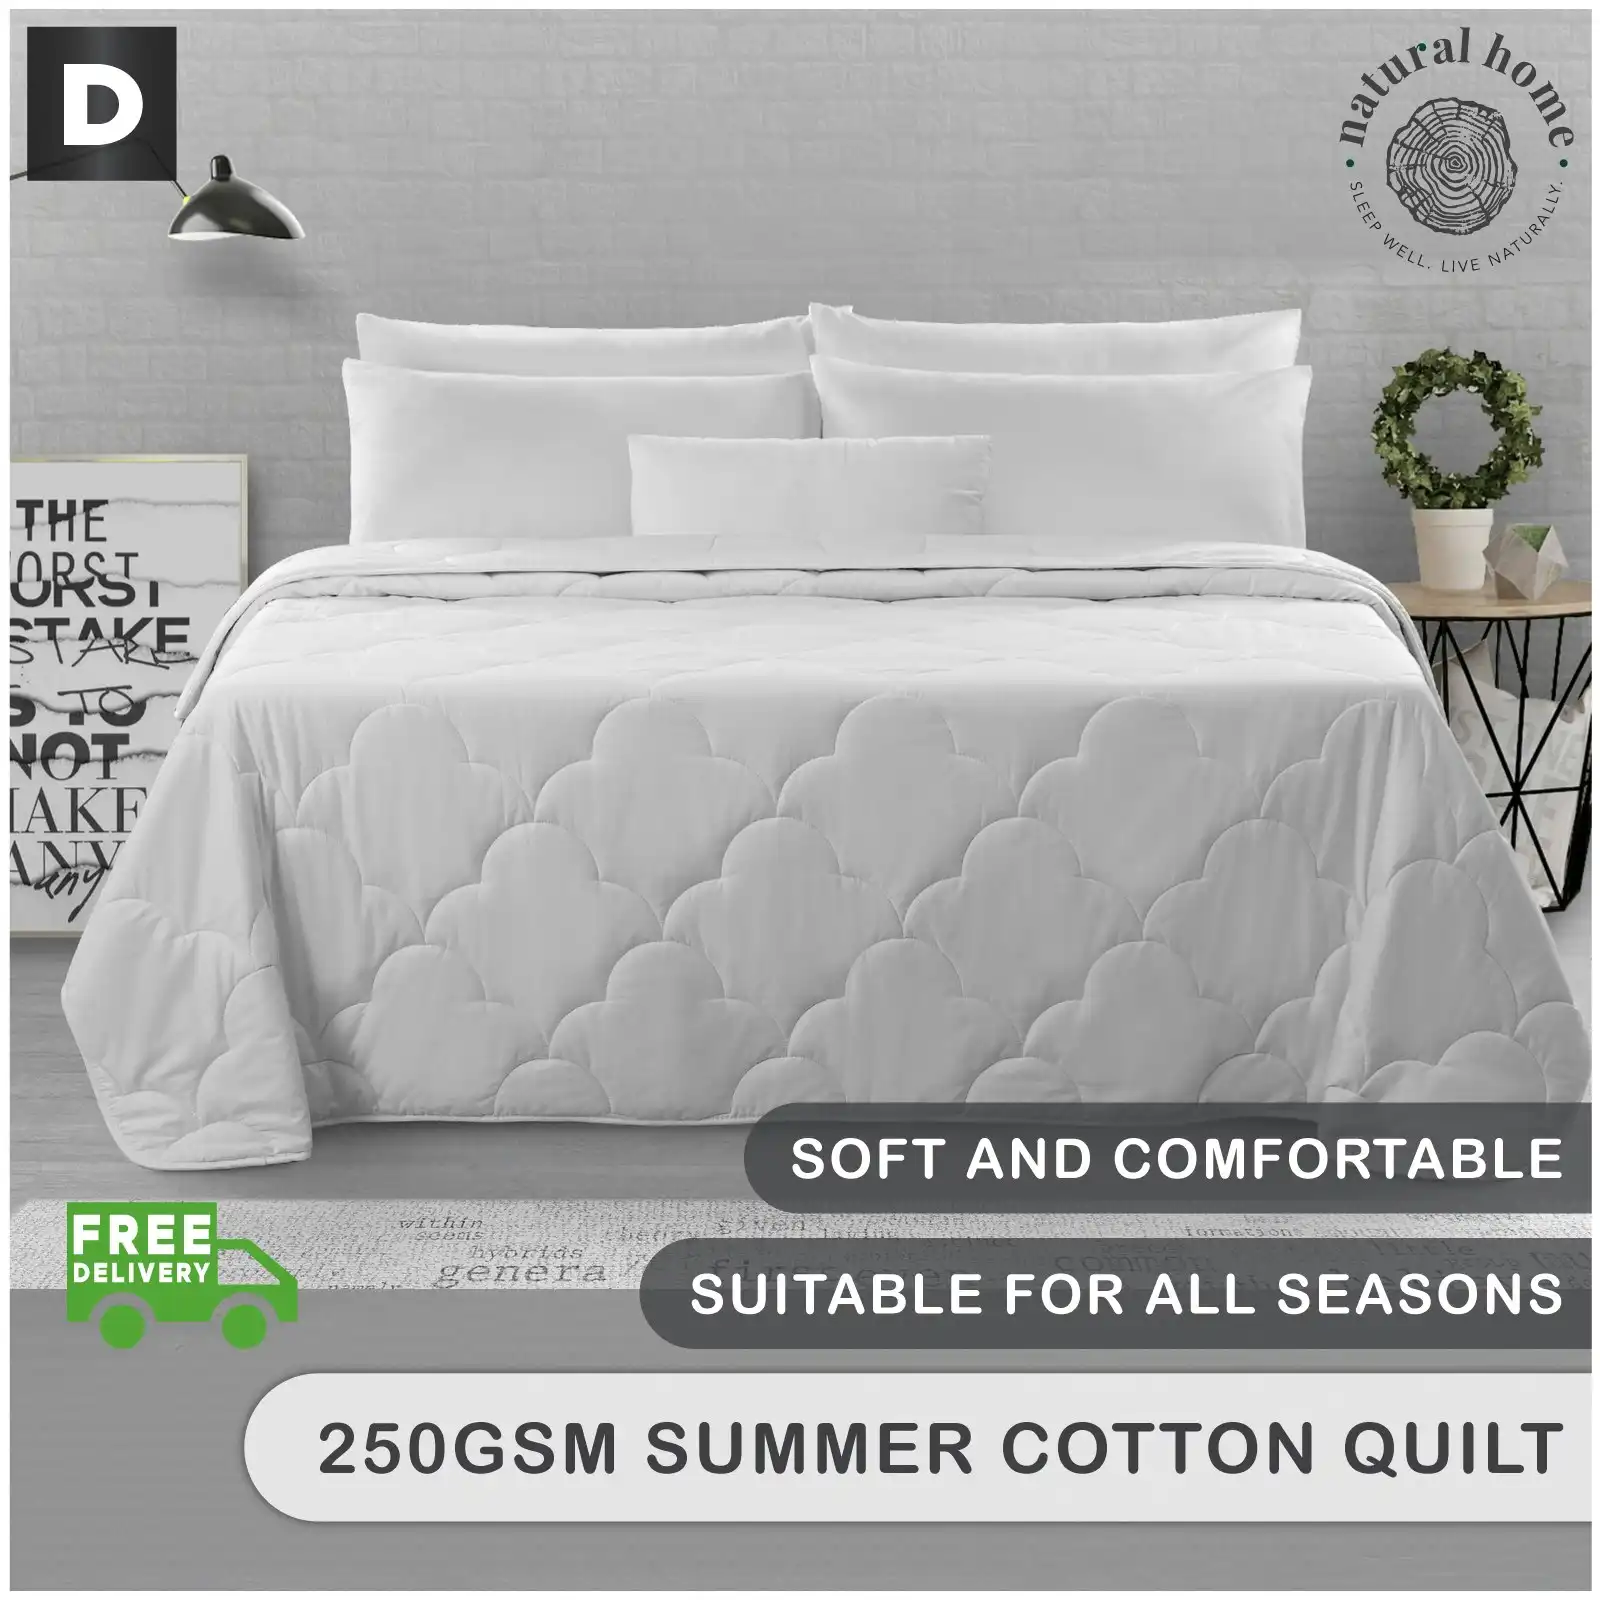 Natural Home Summer Cotton Quilt 250gsm White Double Bed